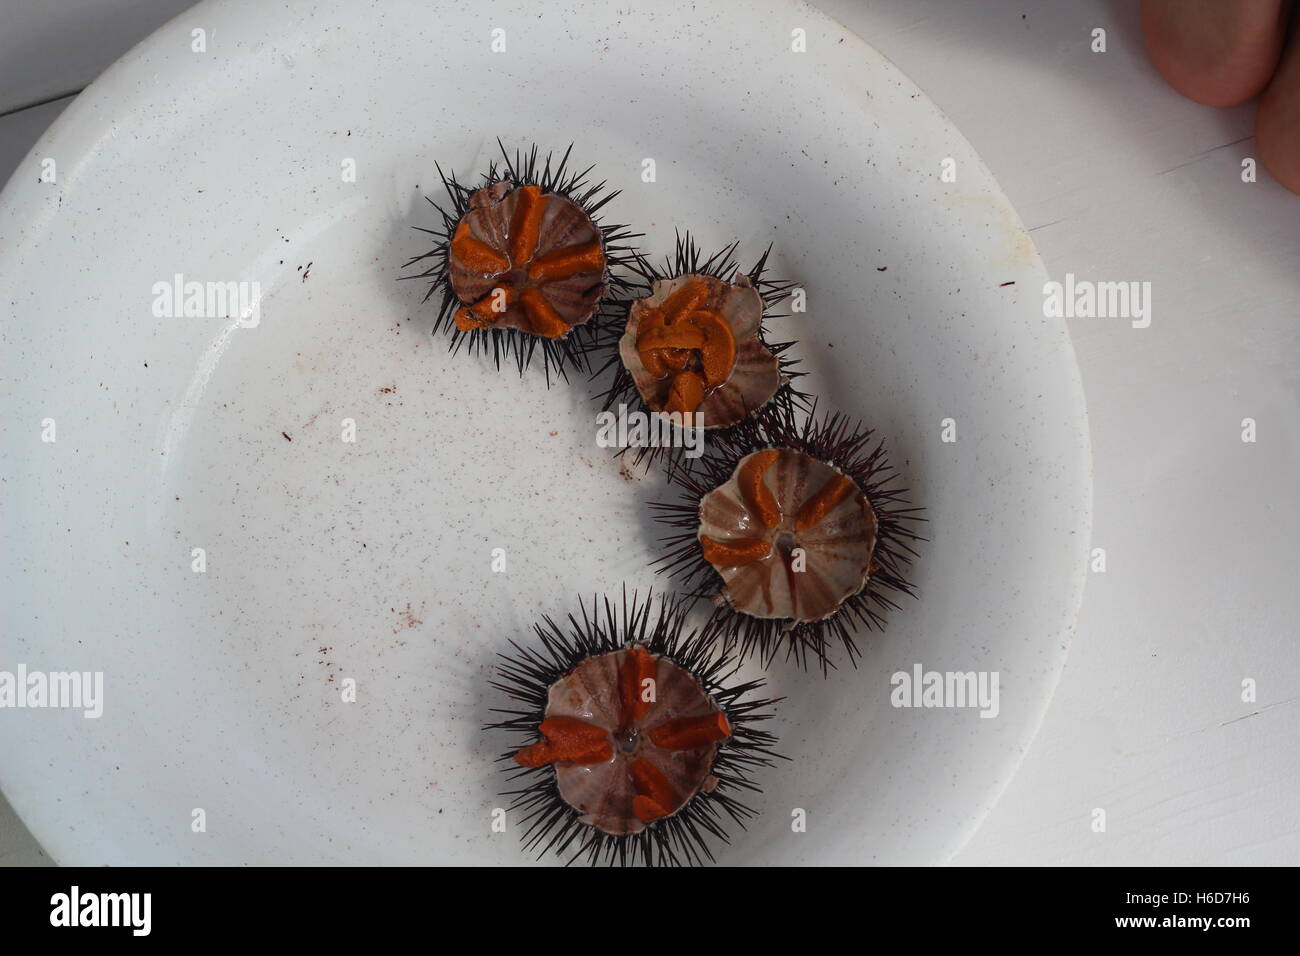 4 Sea urchins on a plate, roe ready to be eaten Stock Photo